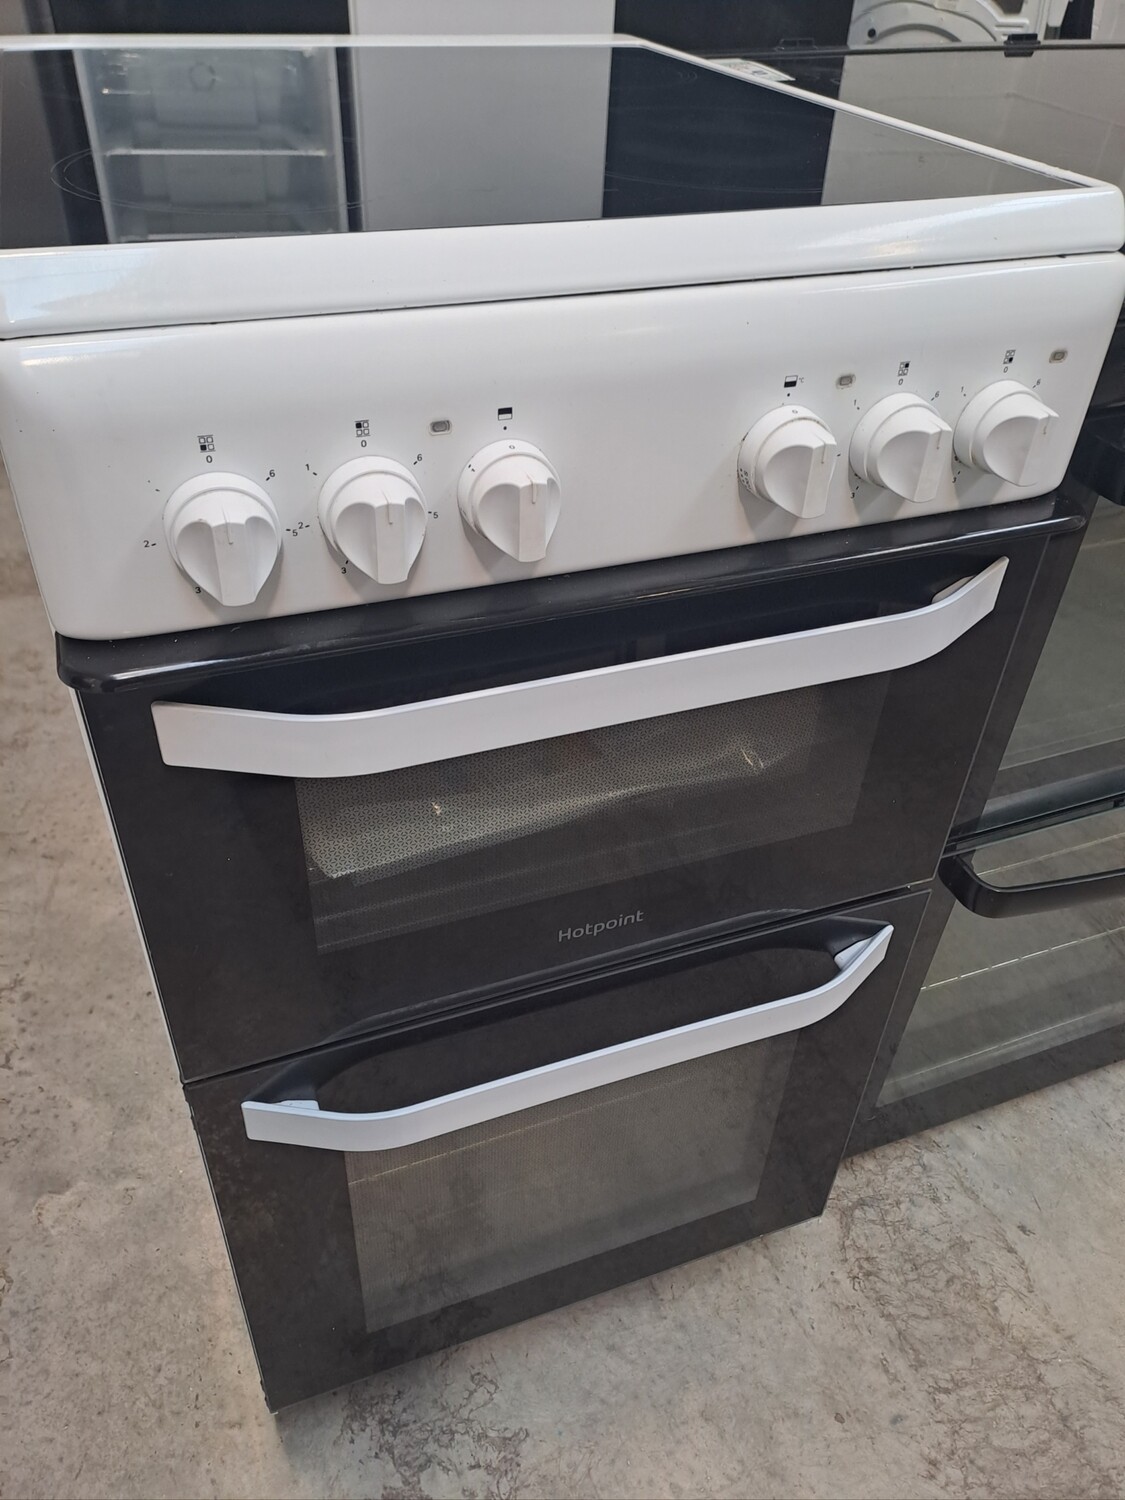 Hotpoint HD5V92KCW/UK 50cm Electric cooker Twin Cavity White - Refurbished + 6 month guarantee 